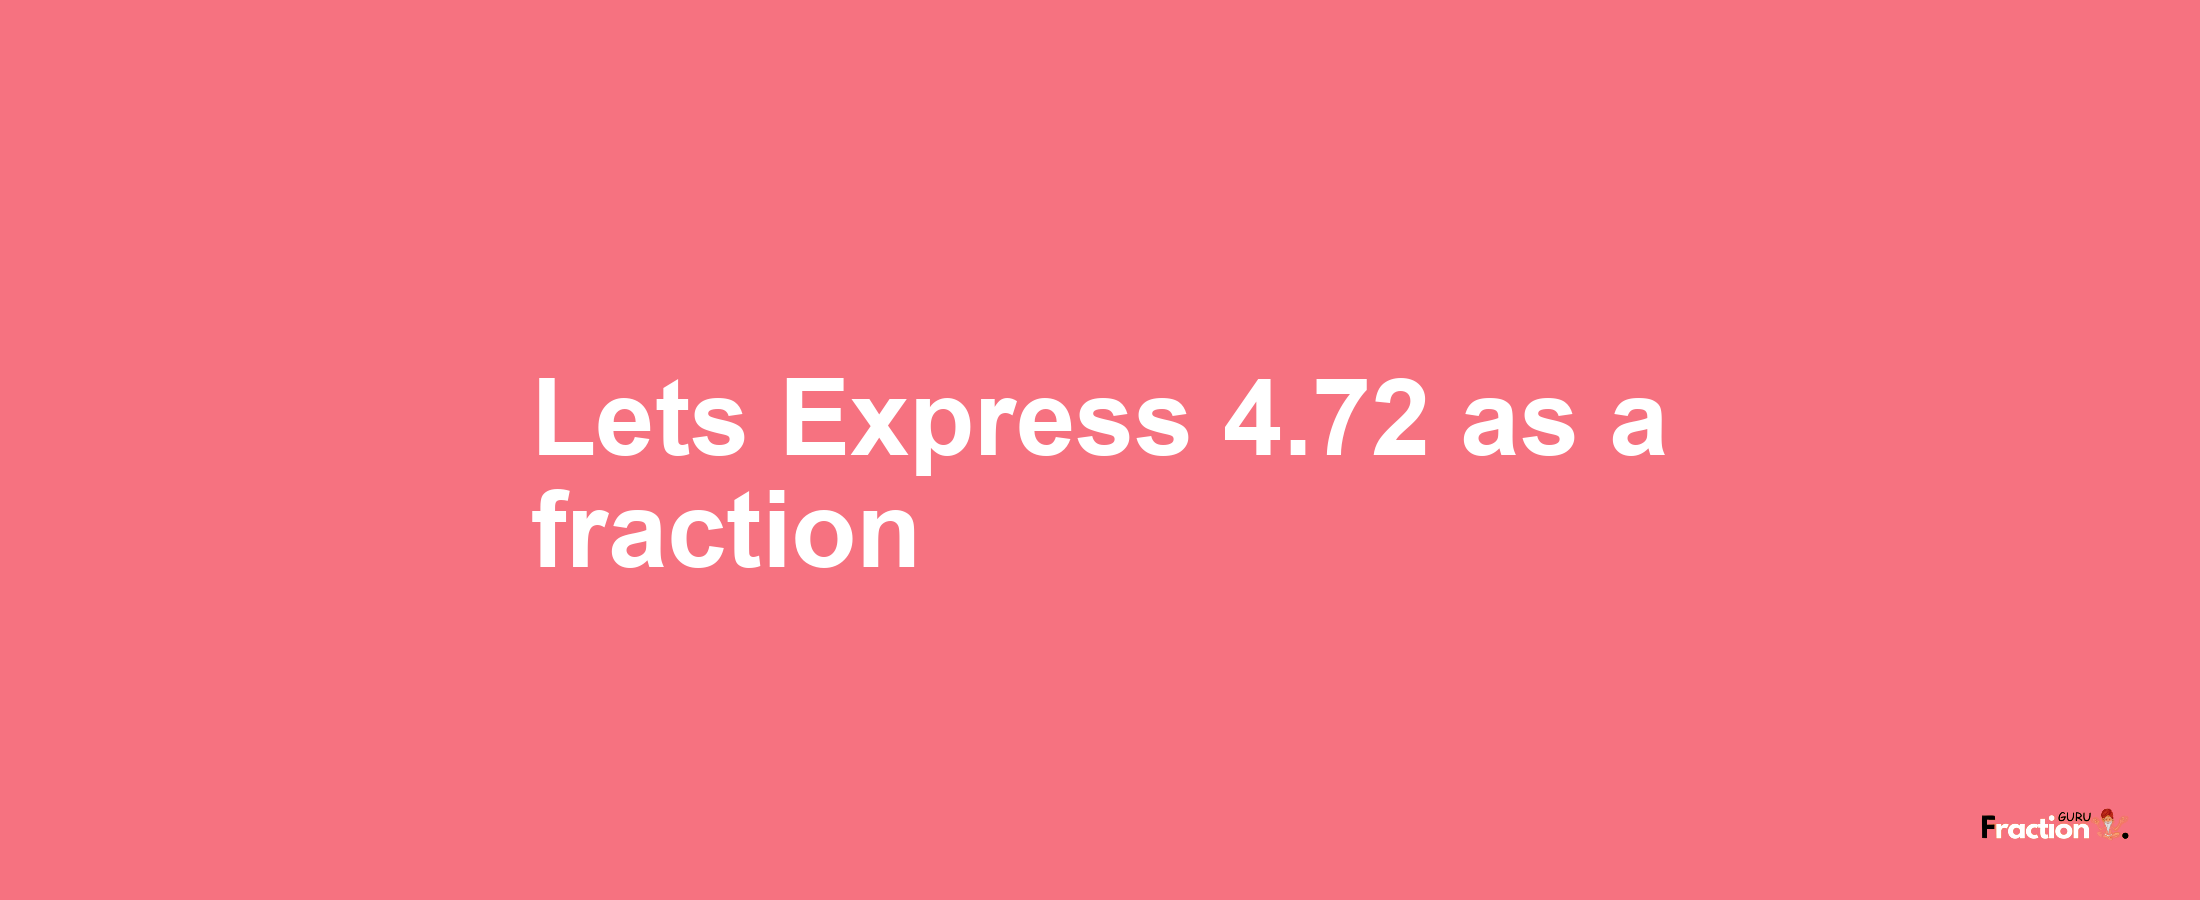 Lets Express 4.72 as afraction